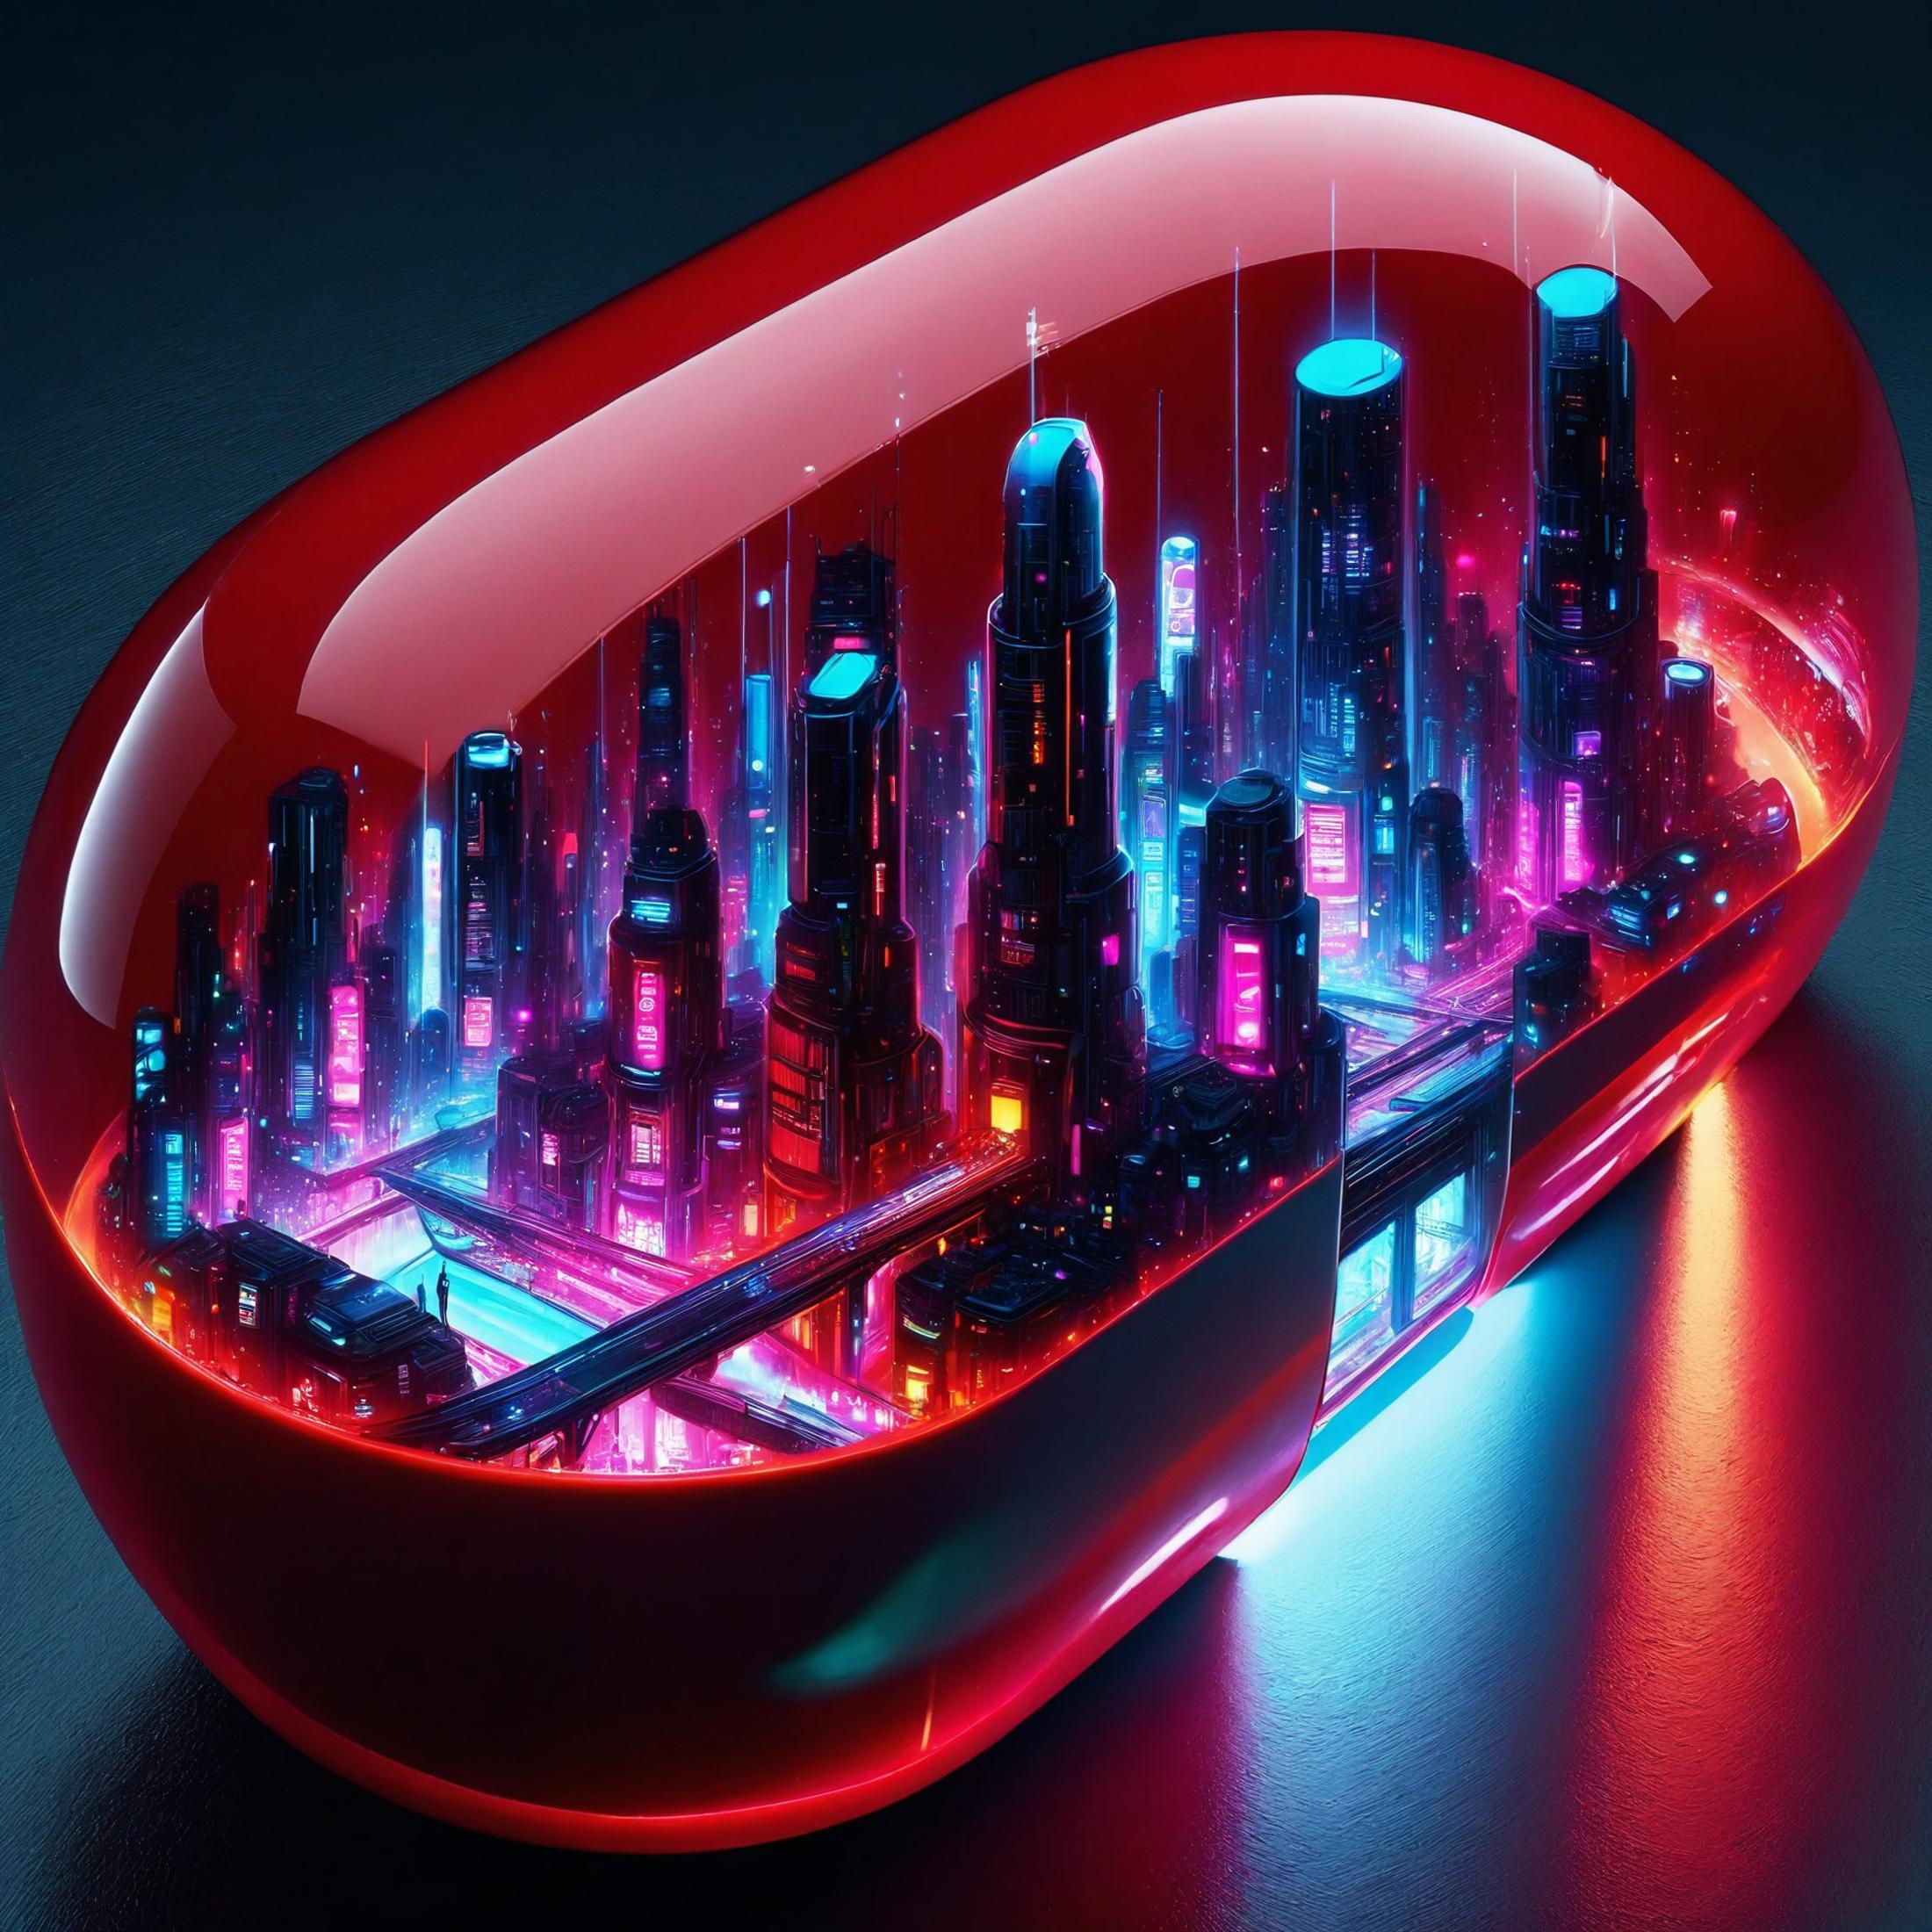 A neon illuminated red pill with a cityscape inside.